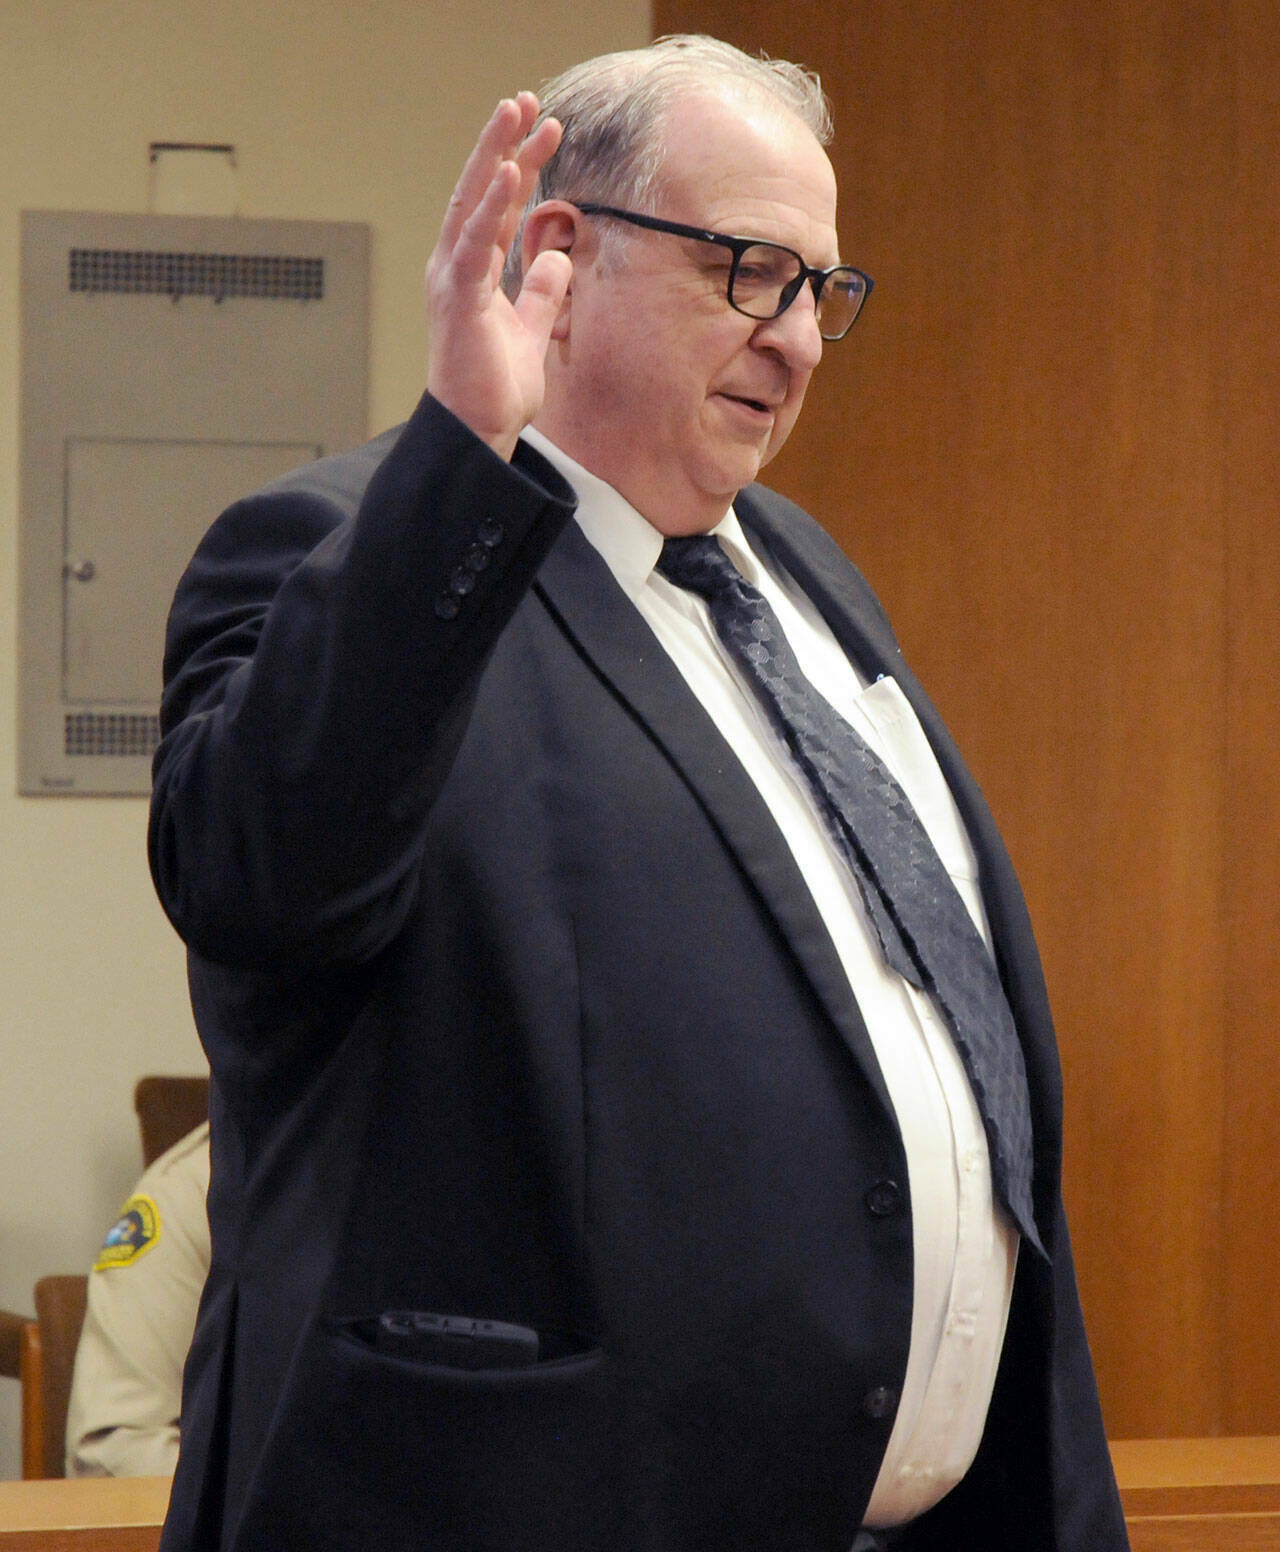 Bruce Hanify takes his oath on Wednesday for his position as District Court 2 Judge. (Keith Thorpe/Peninsula Daily News)